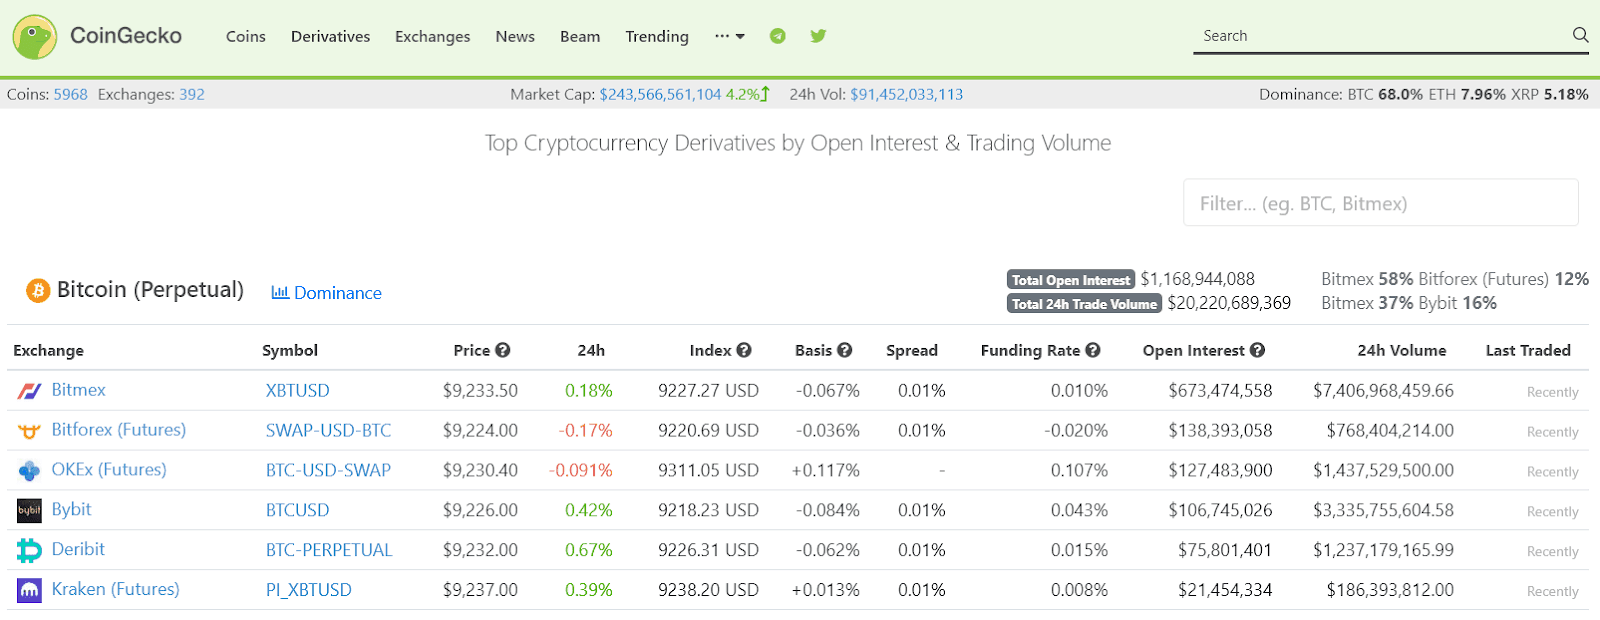 CoinGecko Releases Cryptocurrency Derivatives Section